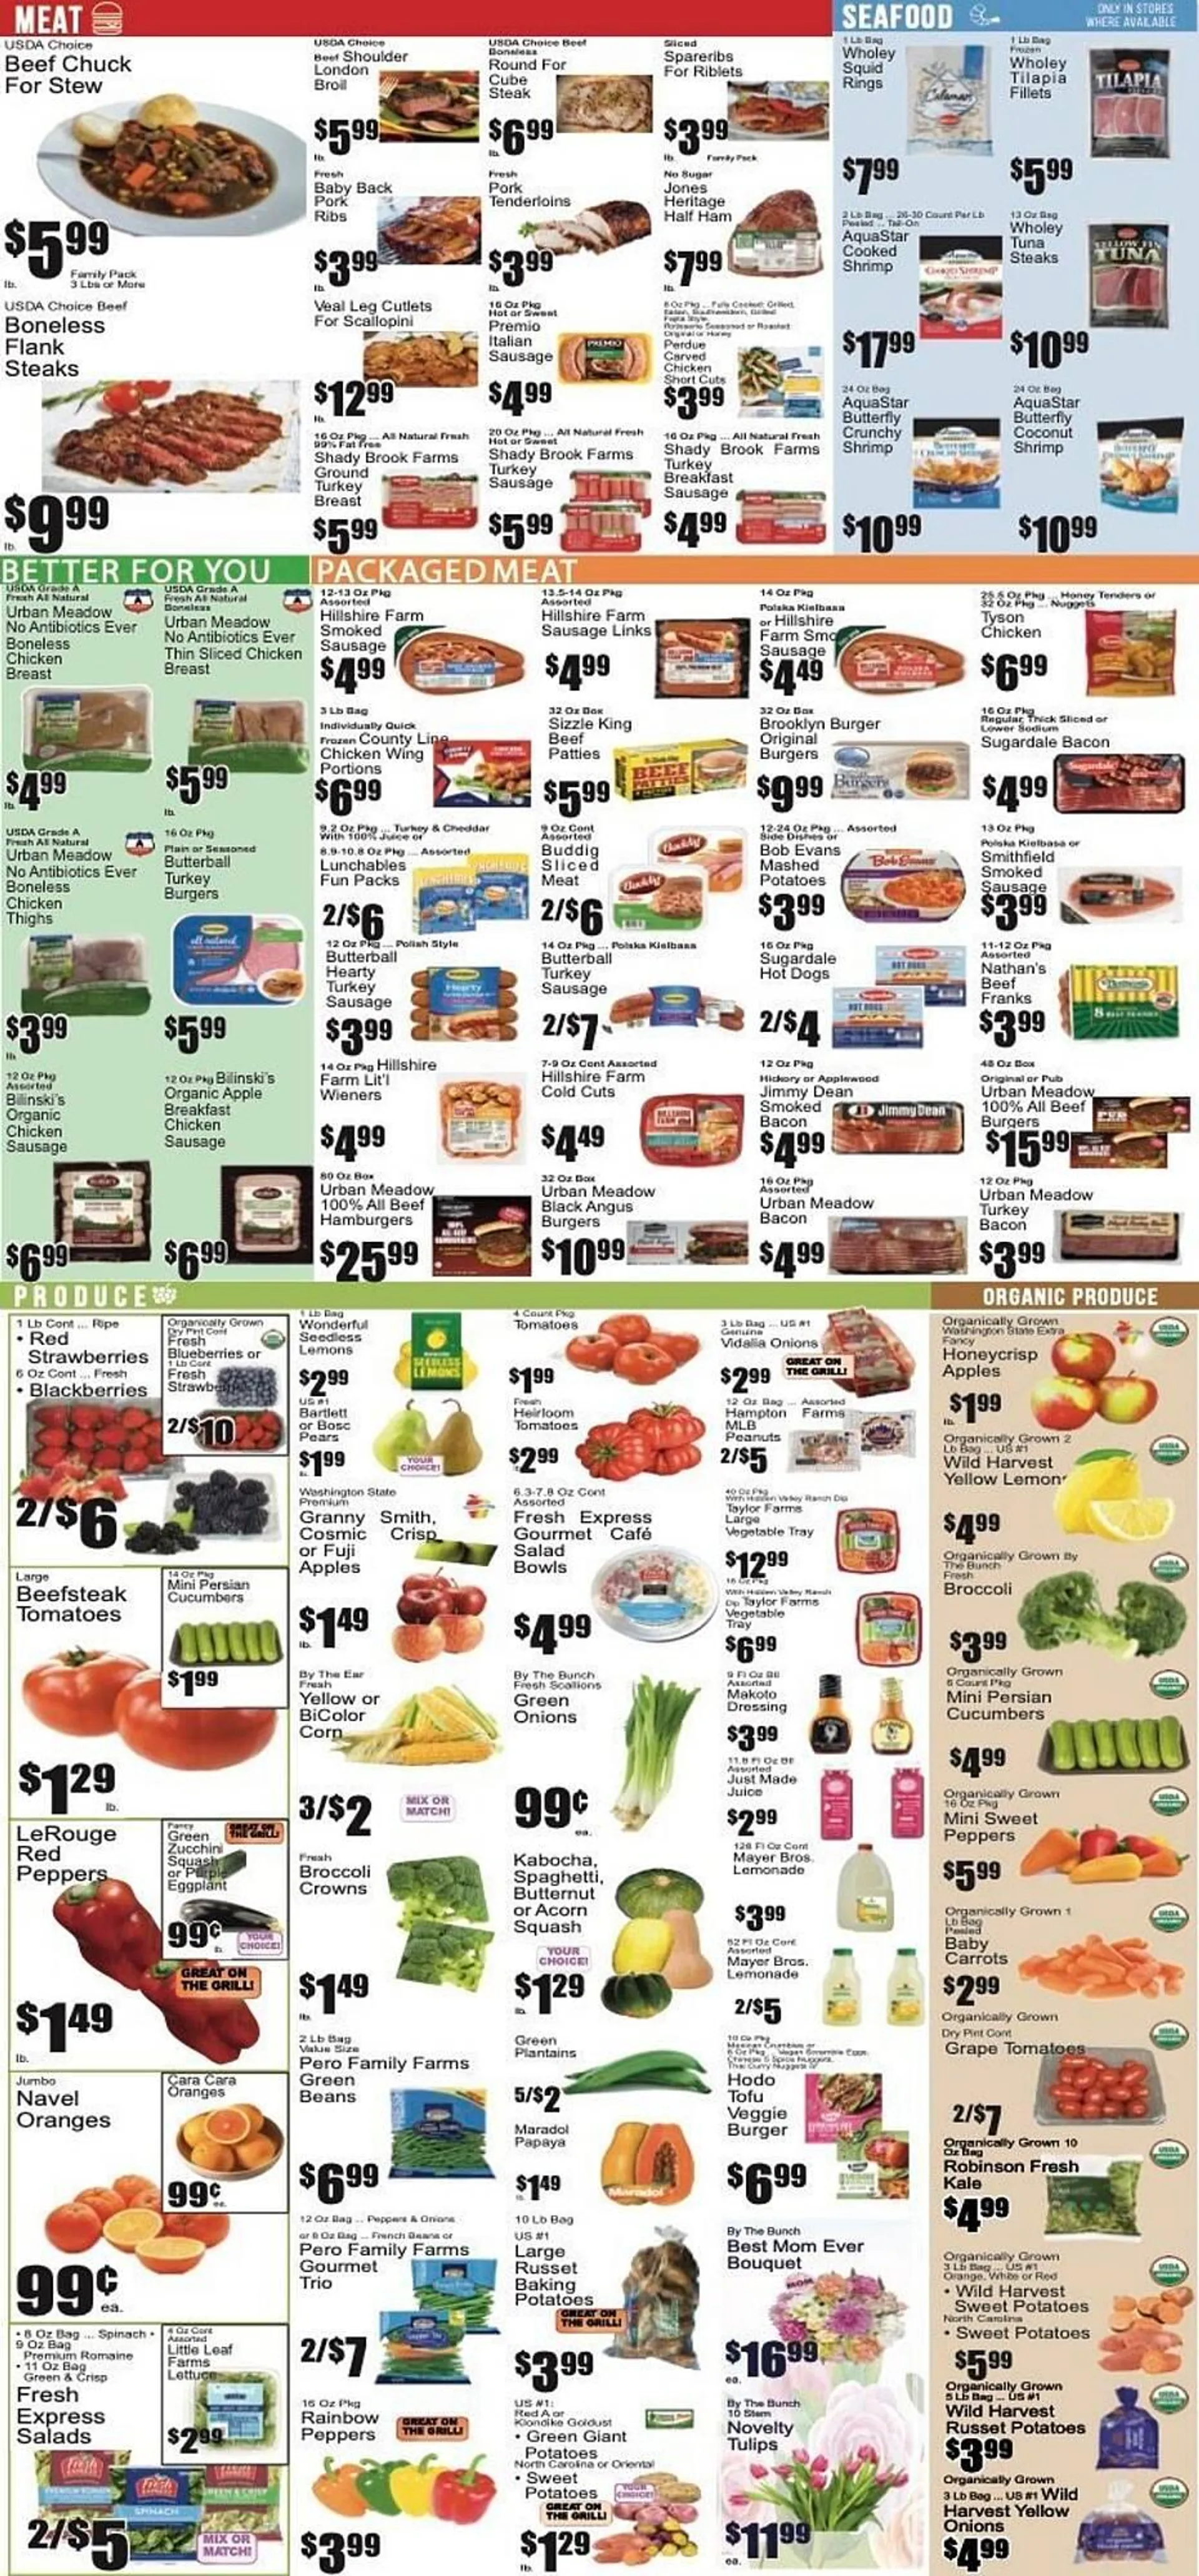 The Food Emporium Weekly Ad - 1